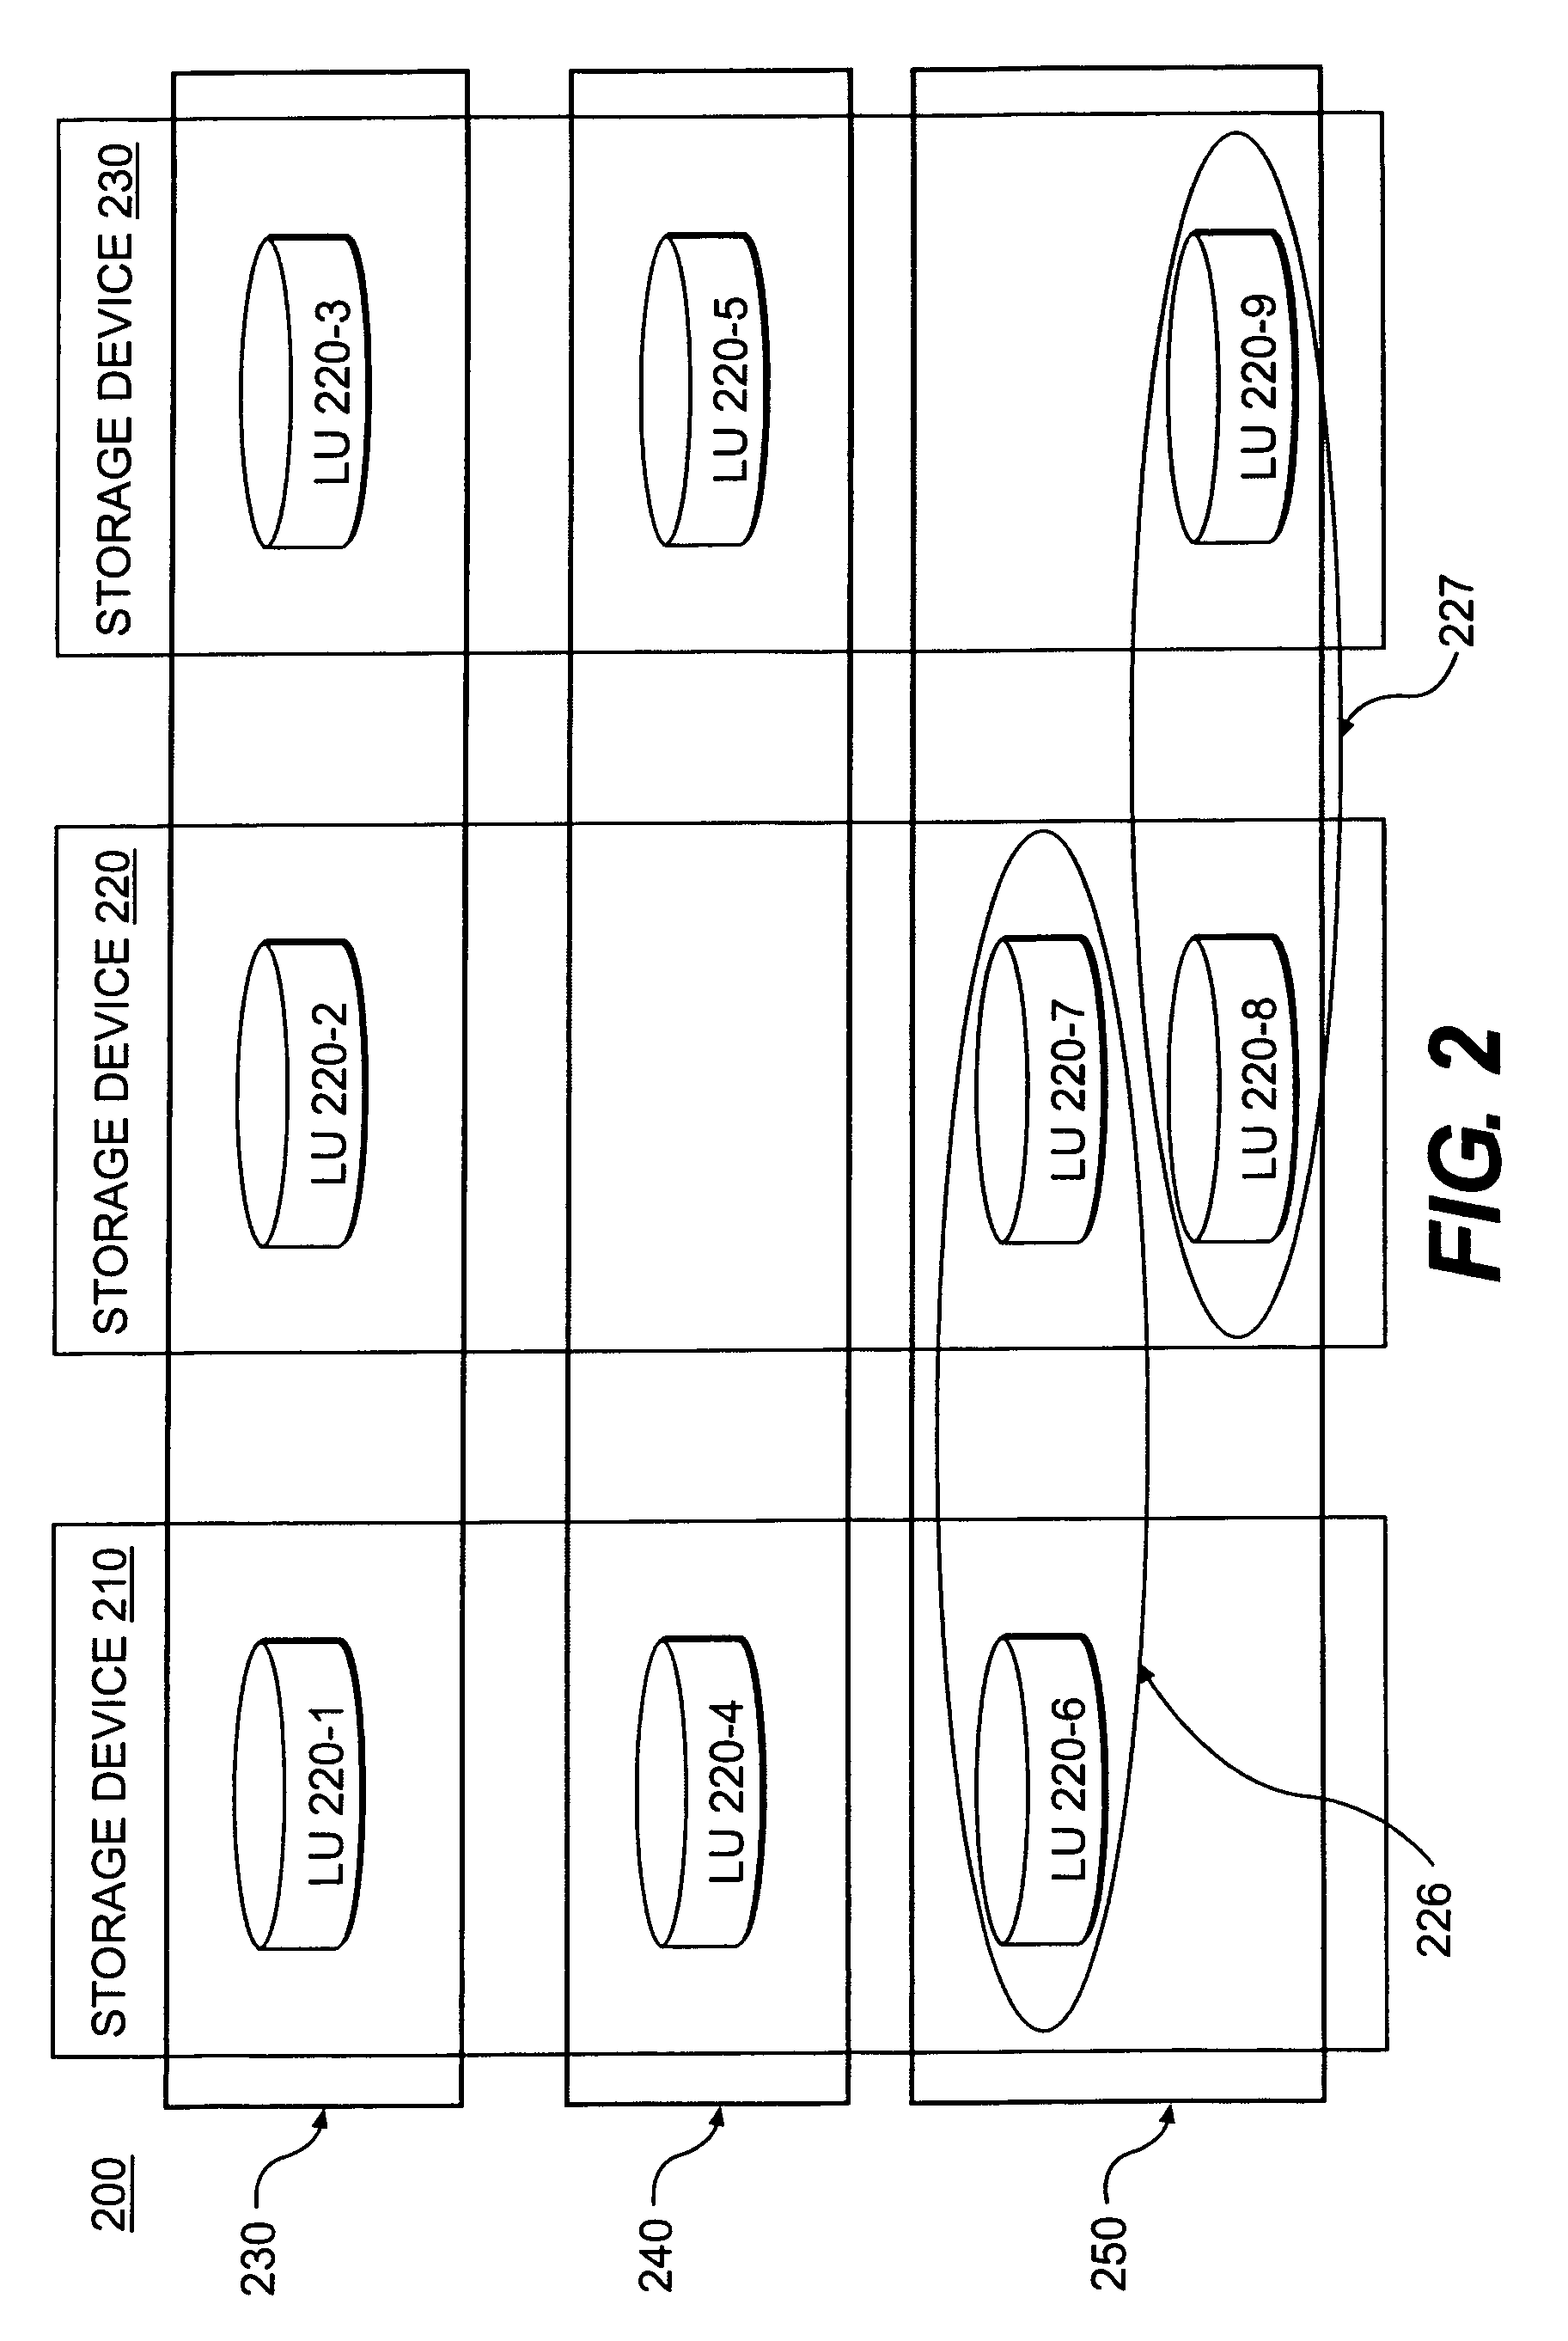 Systems and methods for configuring a storage virtualization environment